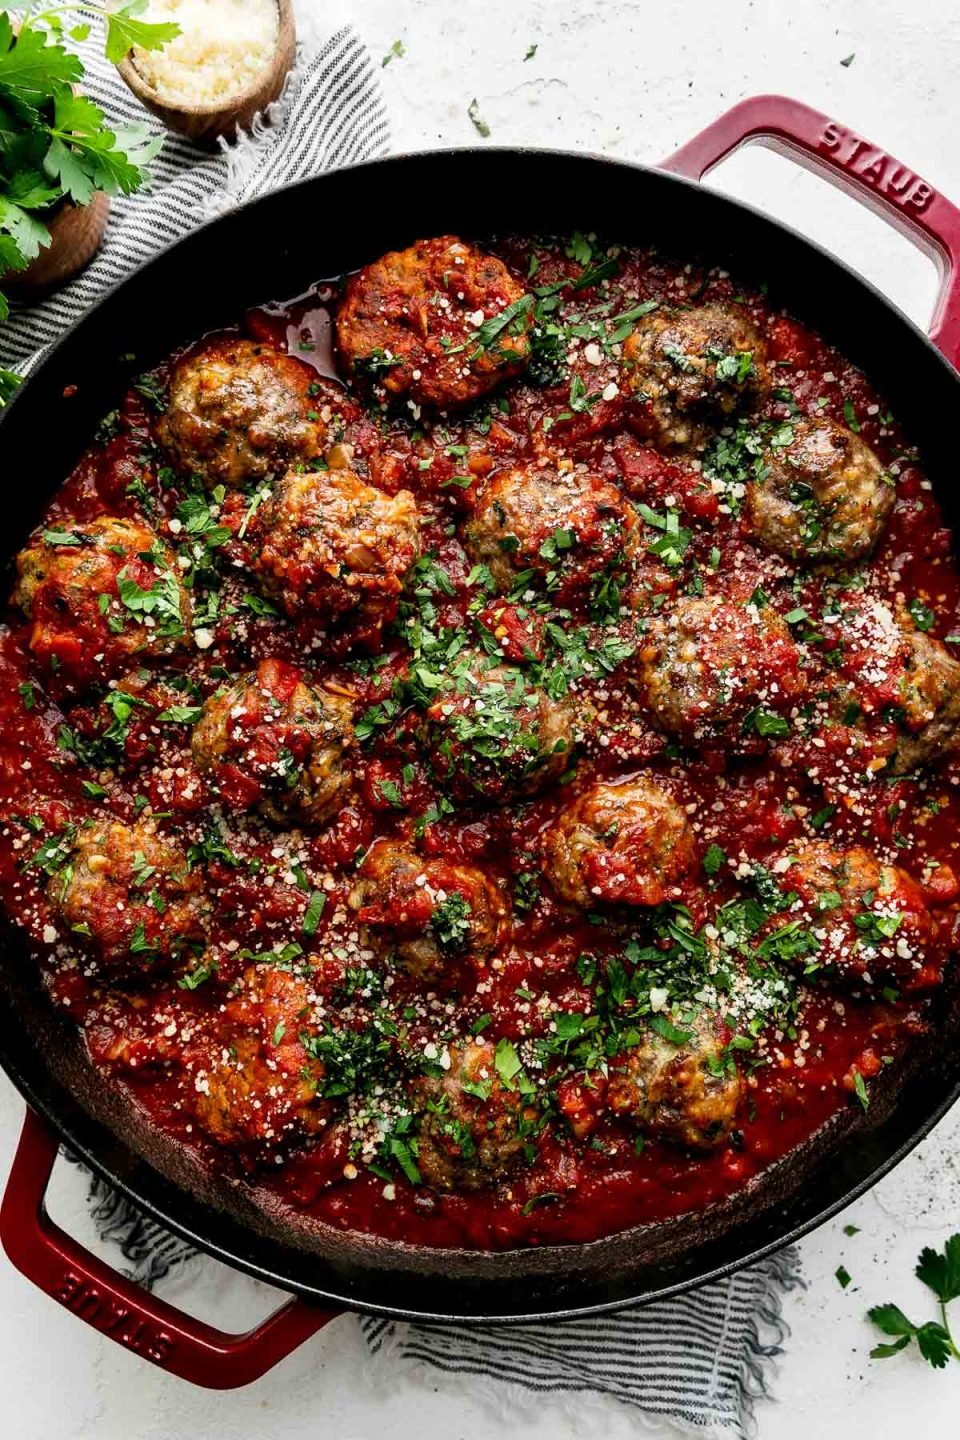 Best-Ever Ricotta Meatballs simmer in a homemade simple red sauce in a cherry red Staub 13-inch Double Handle Fry Pan. The meatballs have been garnished with freshly chopped basil, parsley, and parmesan cheese and the fry pan sits atop a creamy white cement surface. A blue and white striped linen napkin has been placed underneath the fry pan. A small bouquet of fresh parsley in a wooden container and a small wooden pinch bowl filled with parmesan cheese sit atop the linen napkin, alongside of the fry pan.